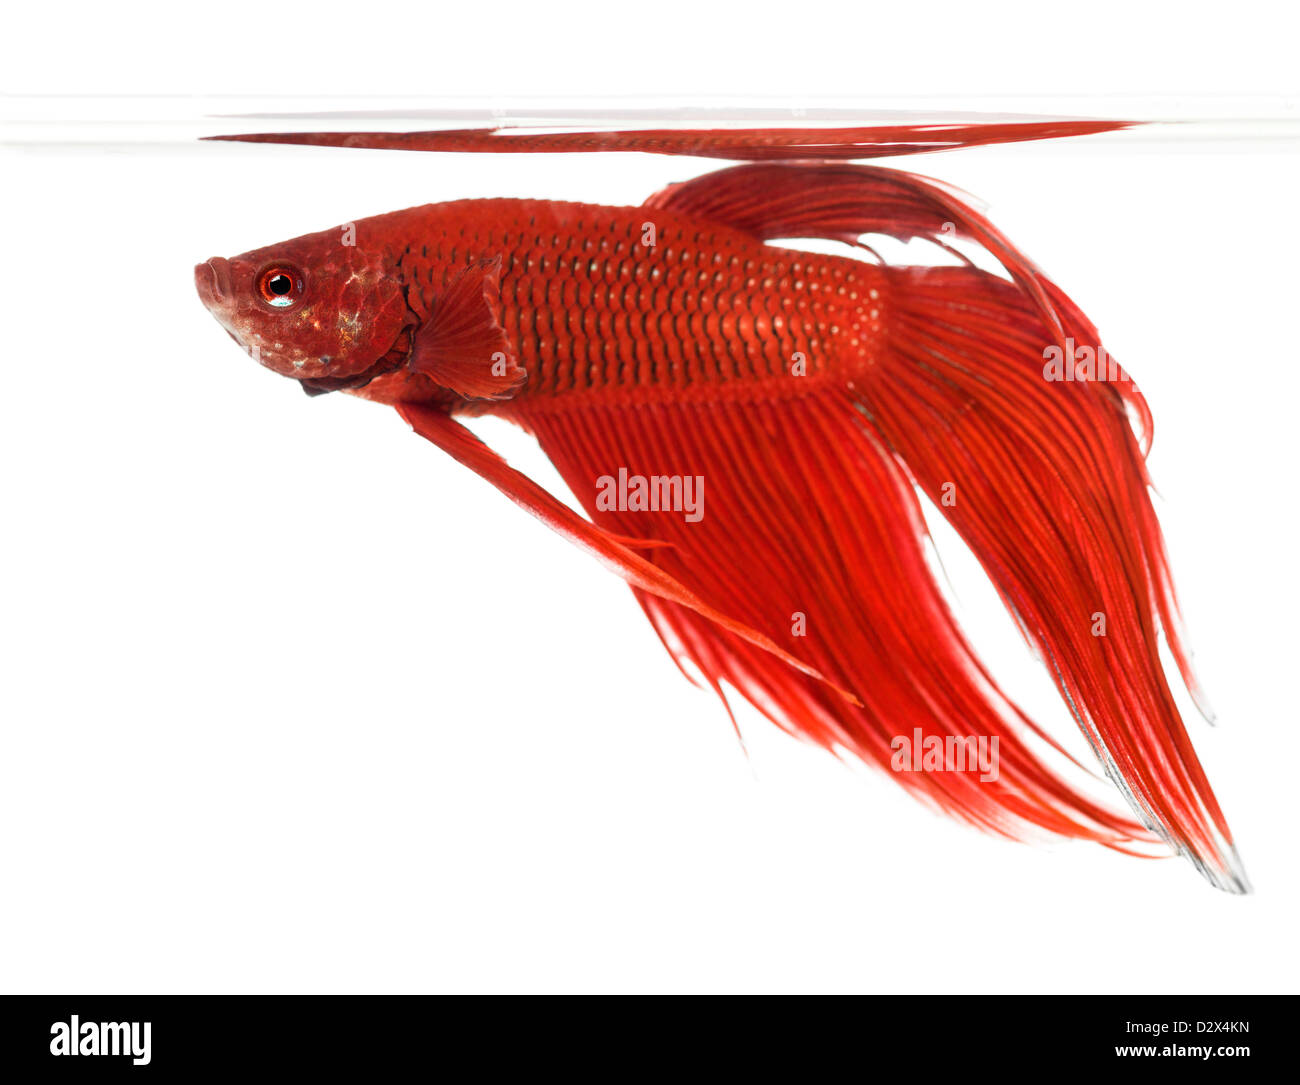 Side view of a Siamese fighting fish, Betta splendens, against white background Stock Photo